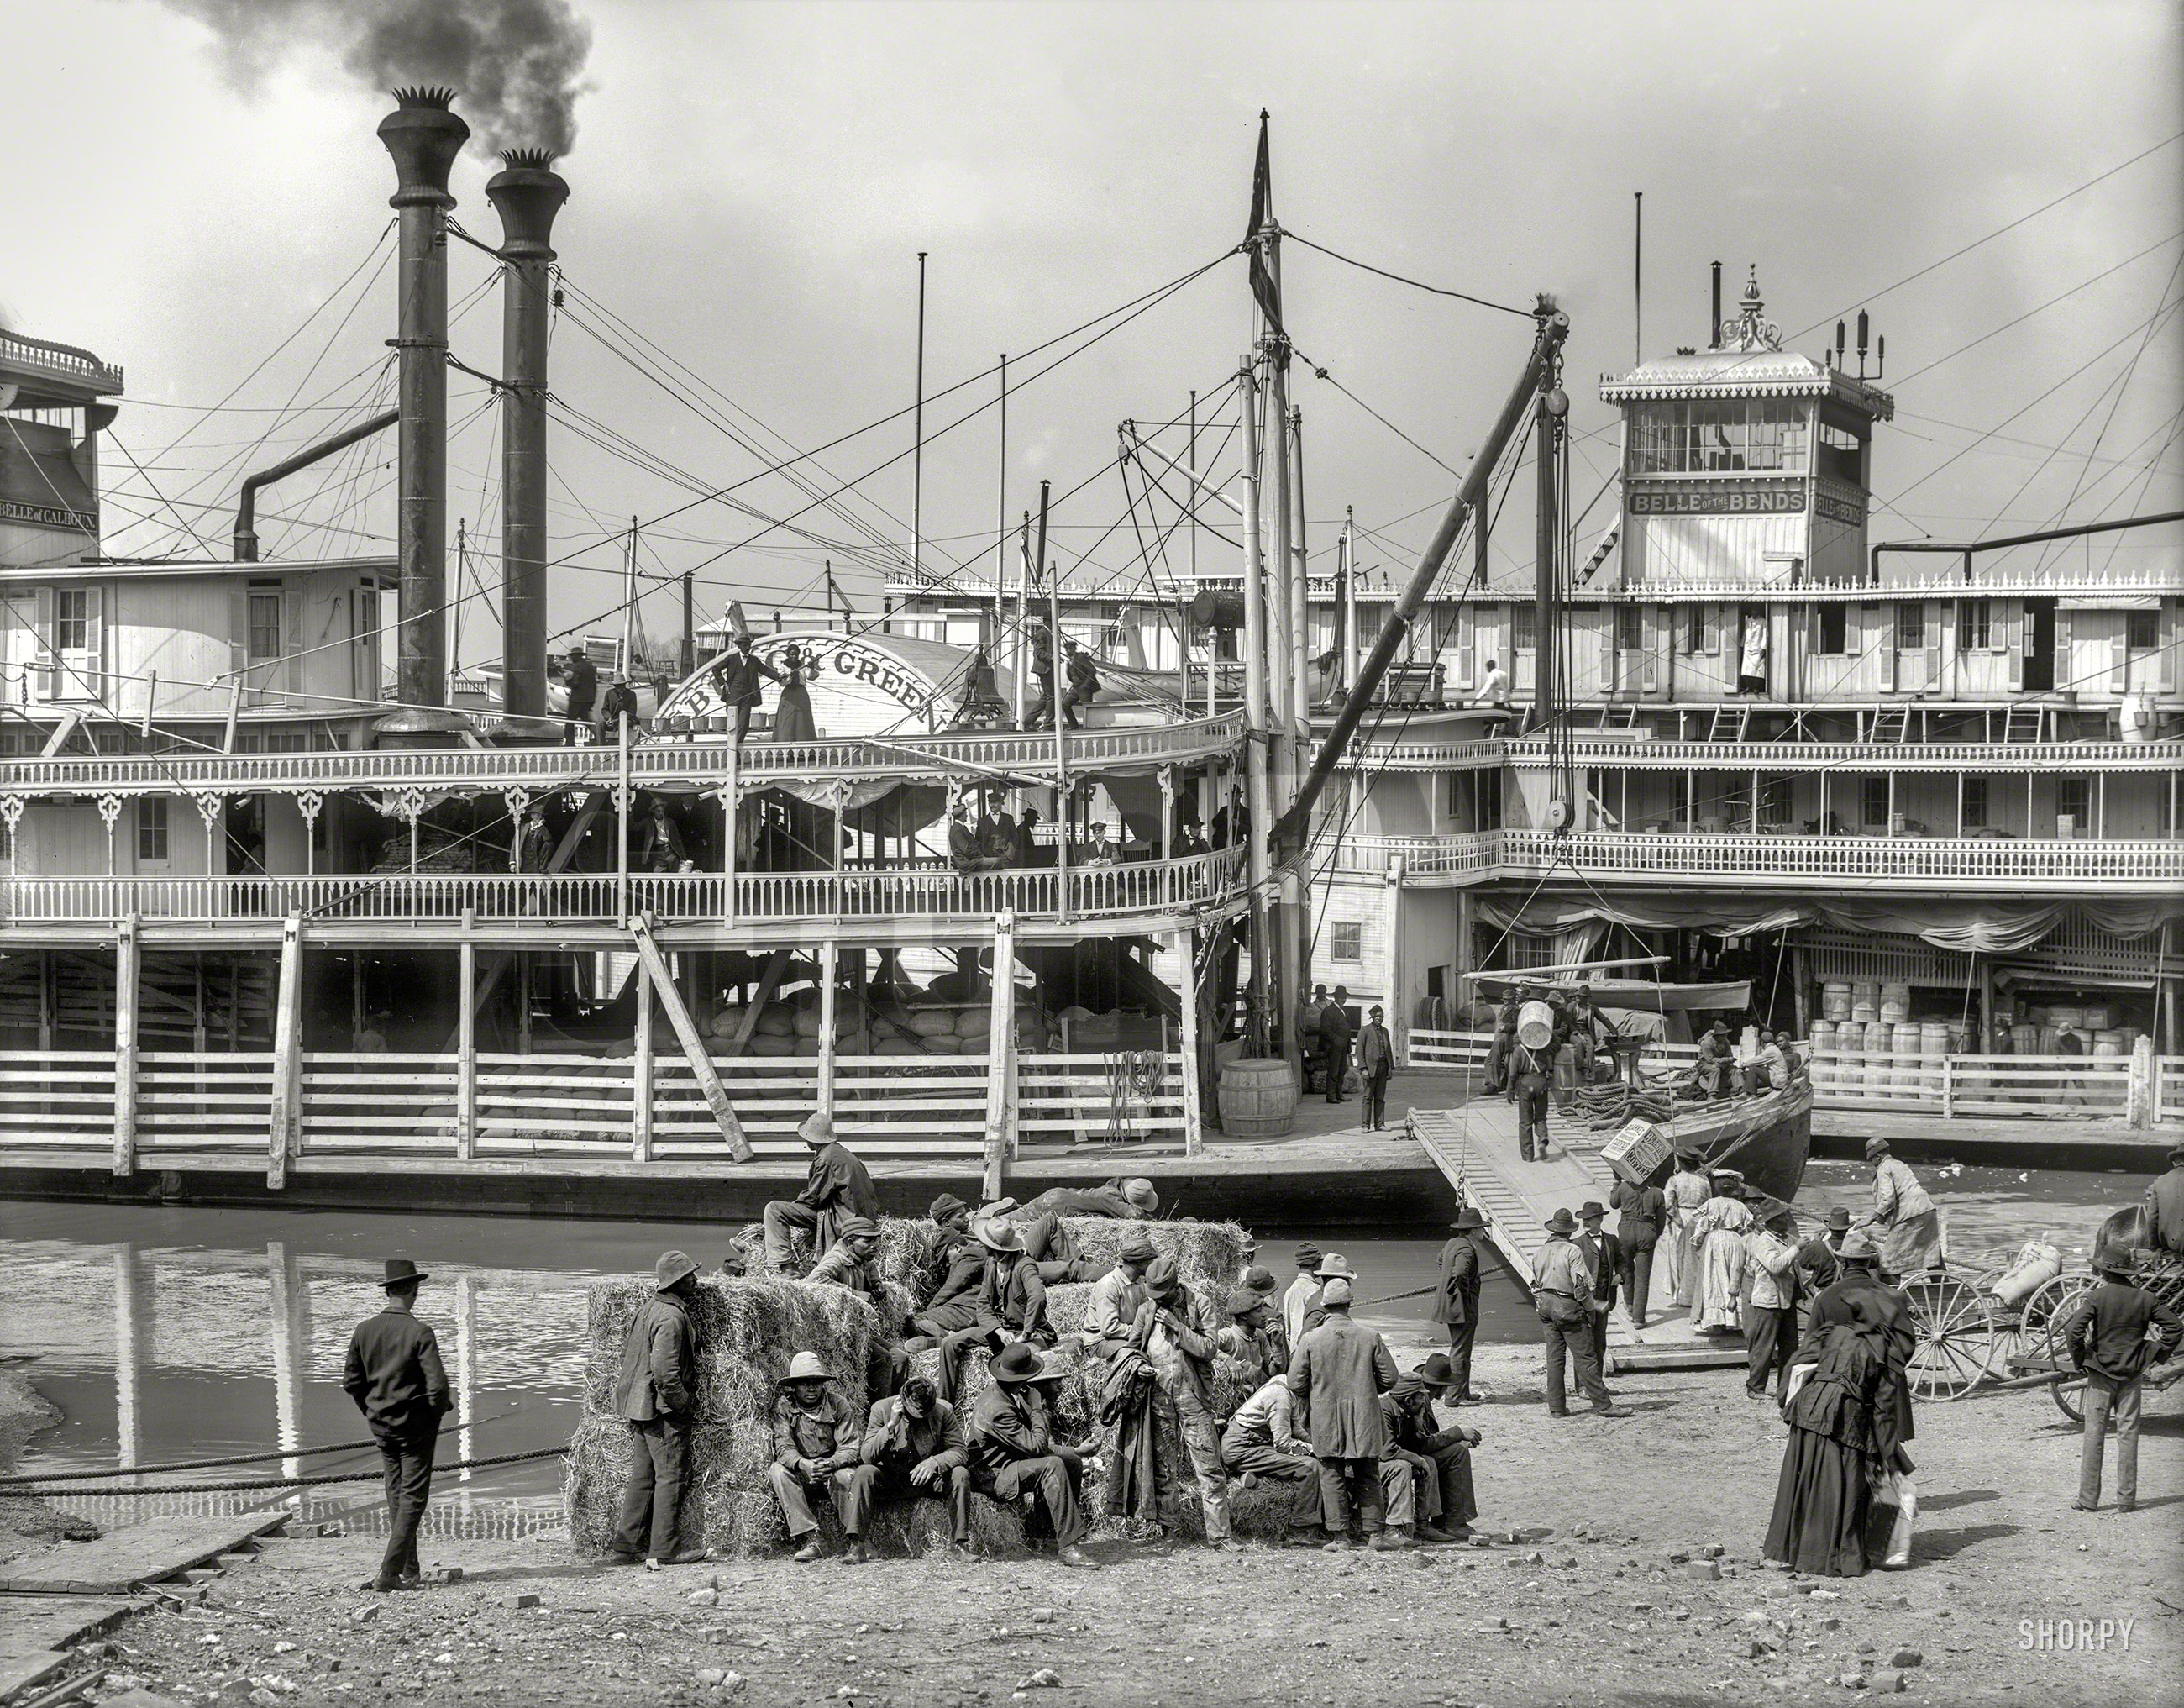 The Mississippi River circa 1906. "Steamboat landing at Vicksburg, Miss." Starring the paddlewheelers Belle of Calhoun and Belle of the Bends. 8x10 inch dry plate glass negative, Detroit Publishing Company. View full size.